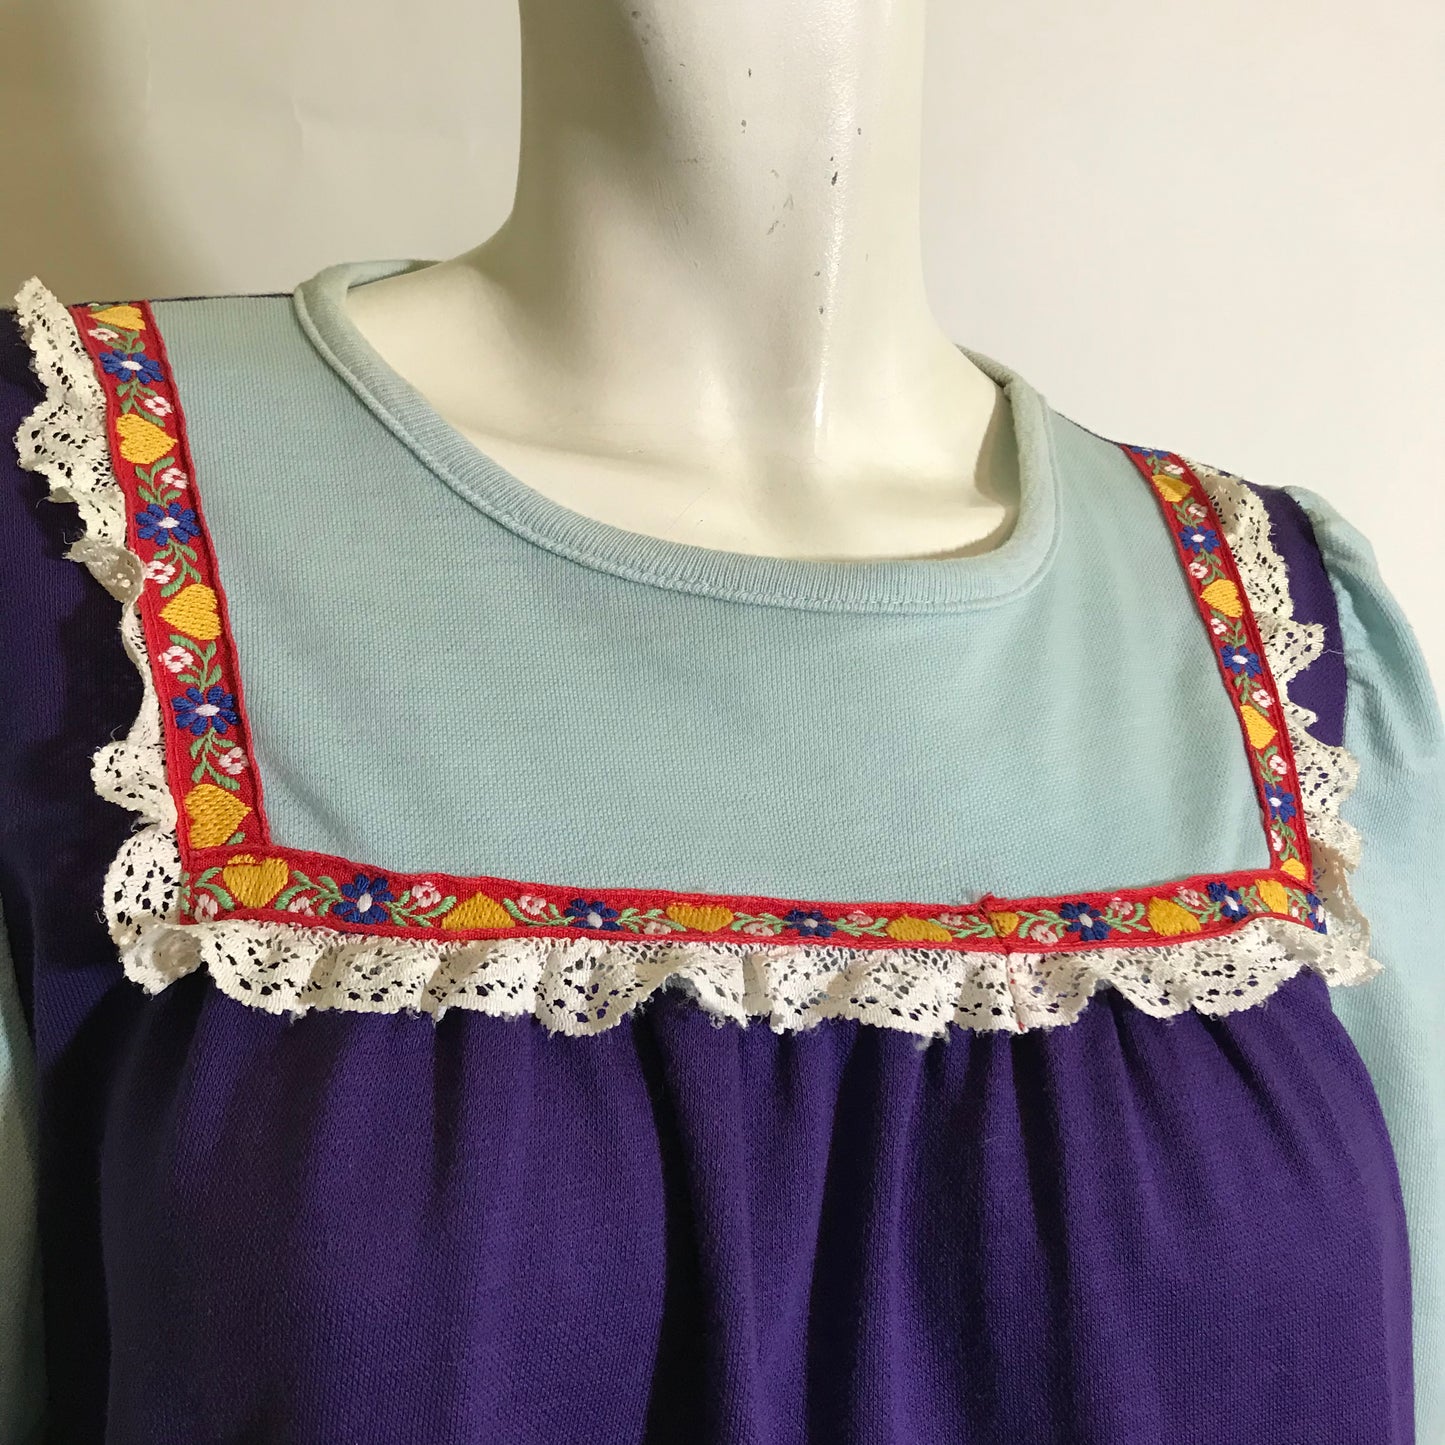 Purple and Blue Lace and Ribbon Trimmed Mini Dress circa 1970s